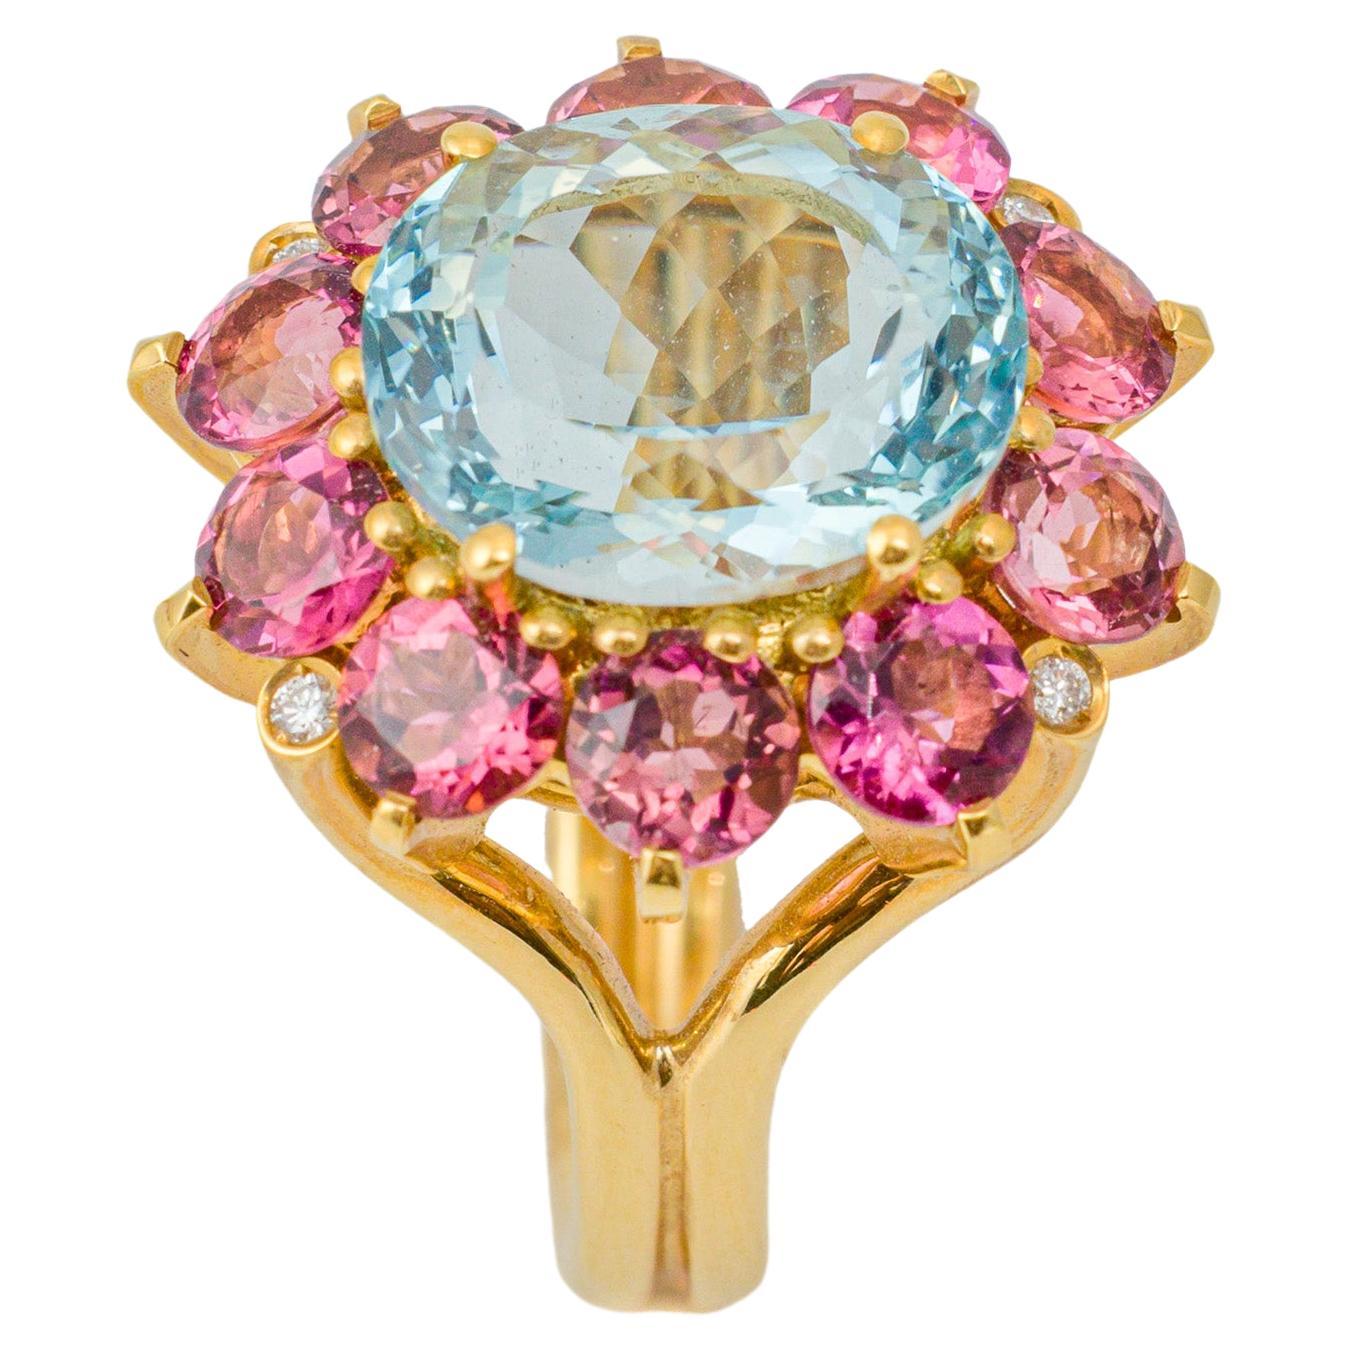 "Costis" Imperial Rosette Ring - Central Aquamarine with Rubellites in 18K Gold